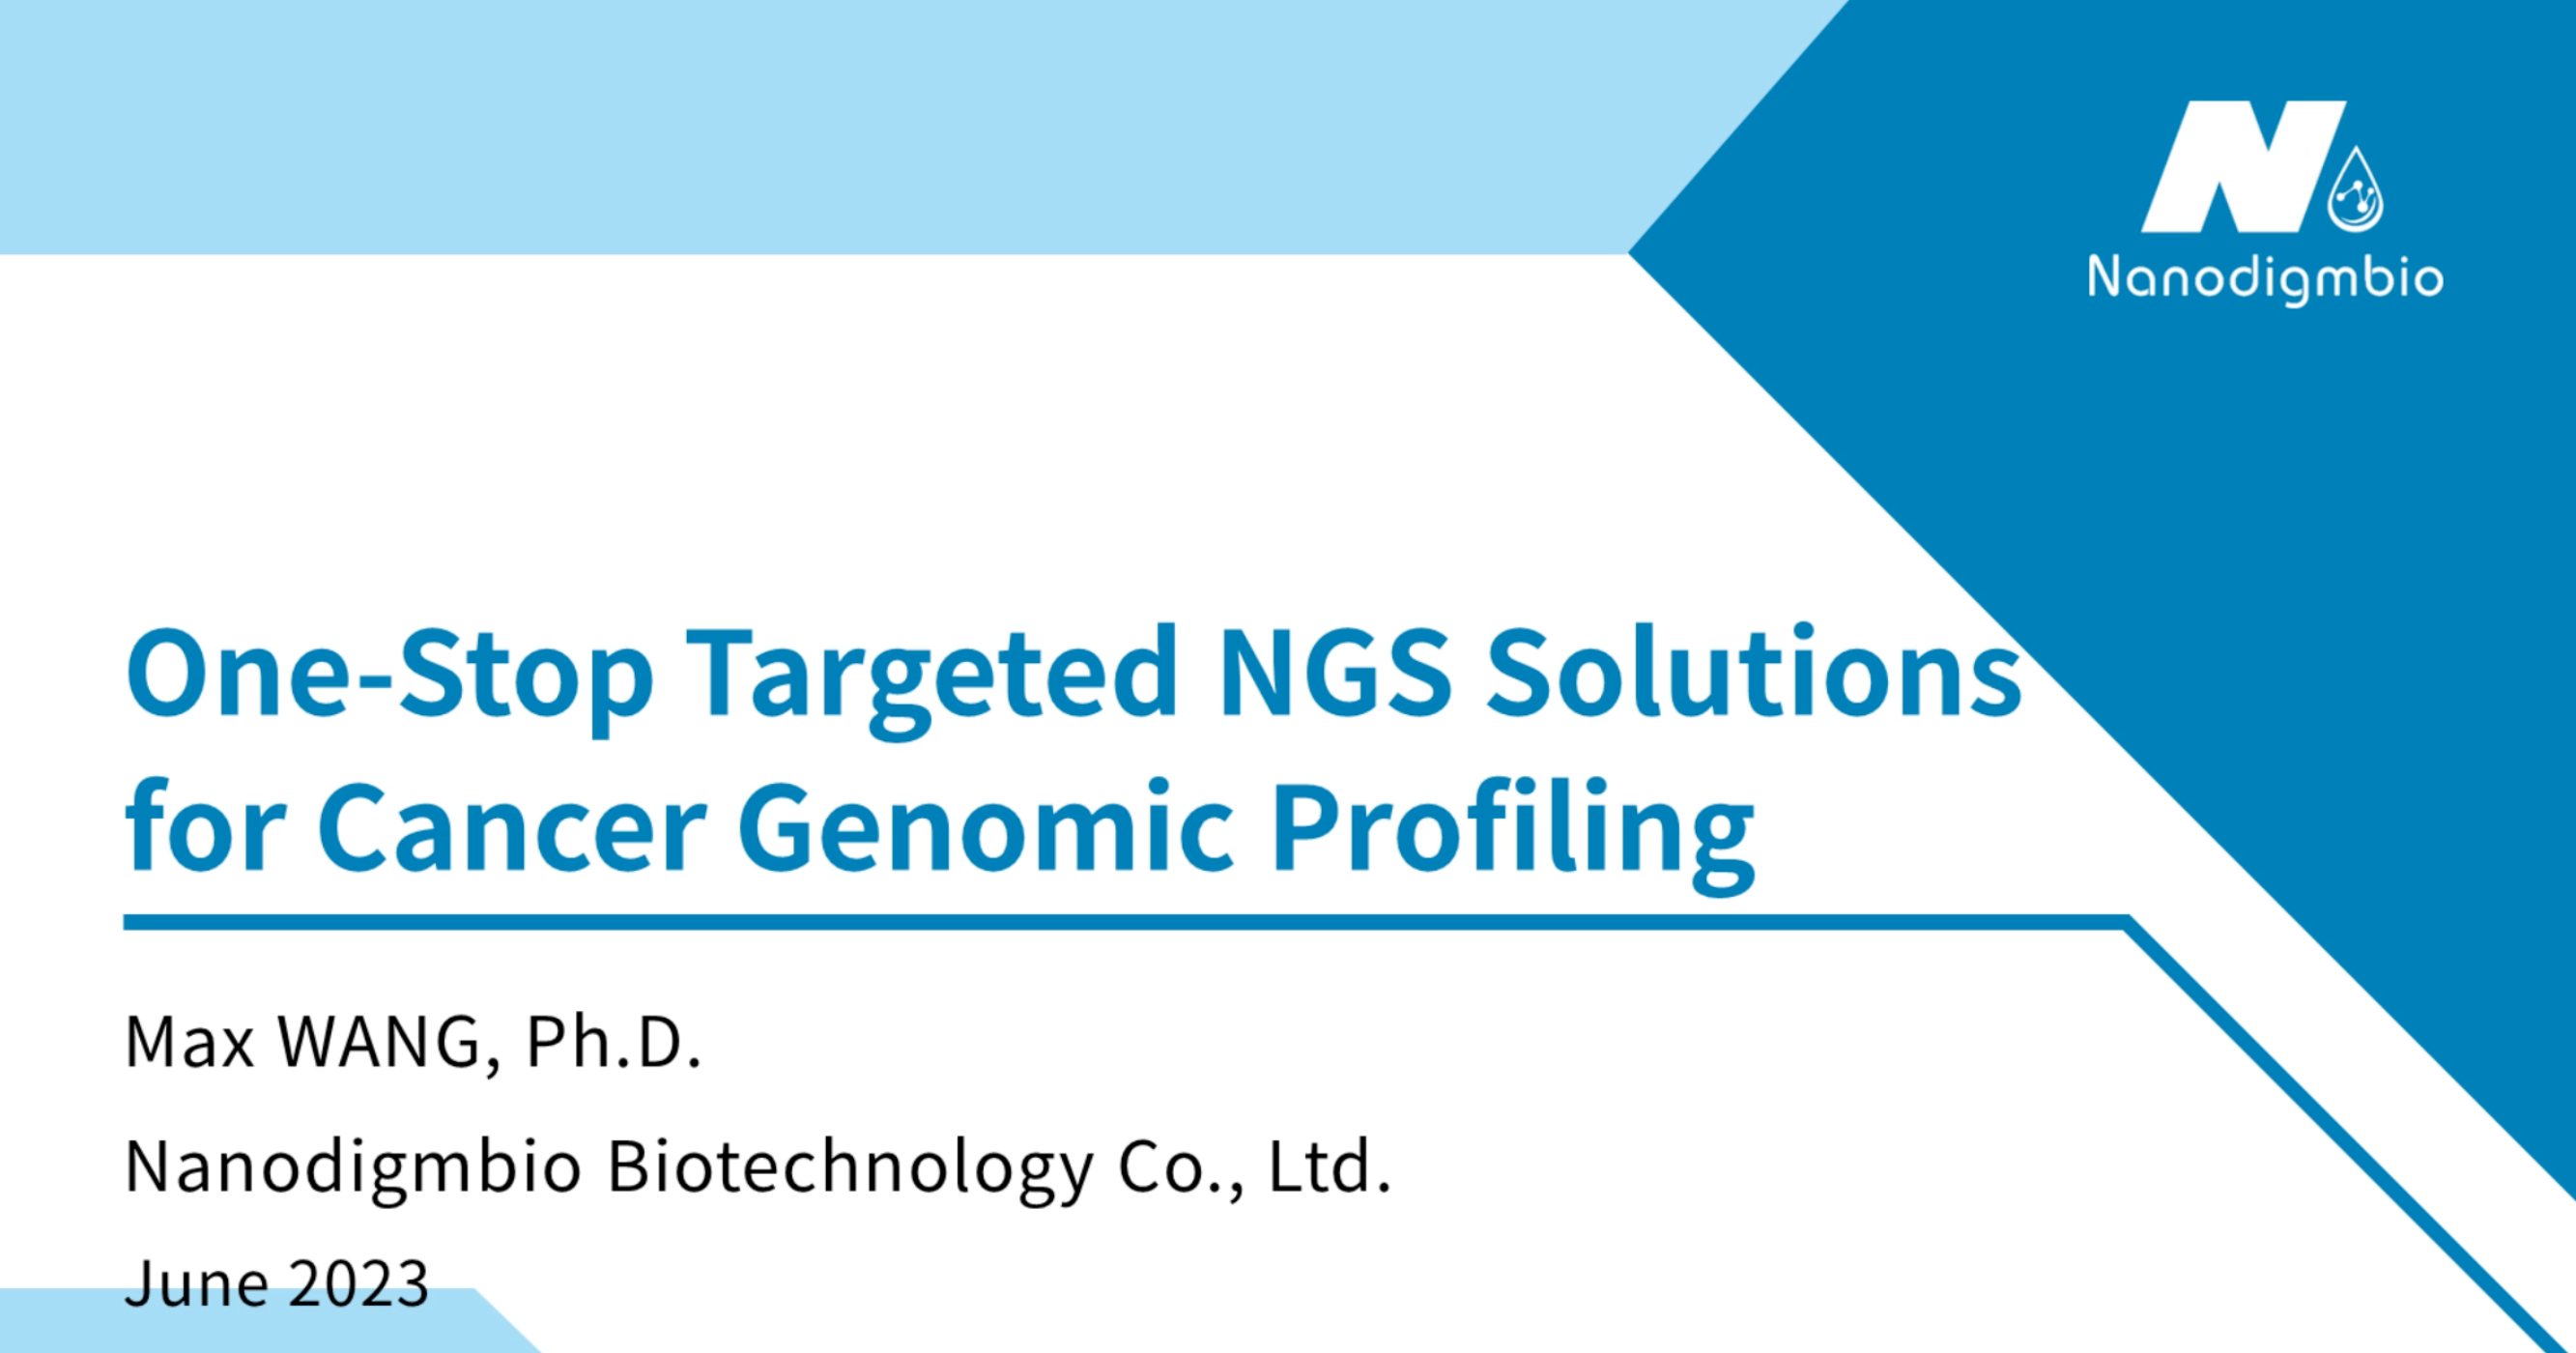 One-Stop Targeted NGS Solution for Cancer Genomic Profiling